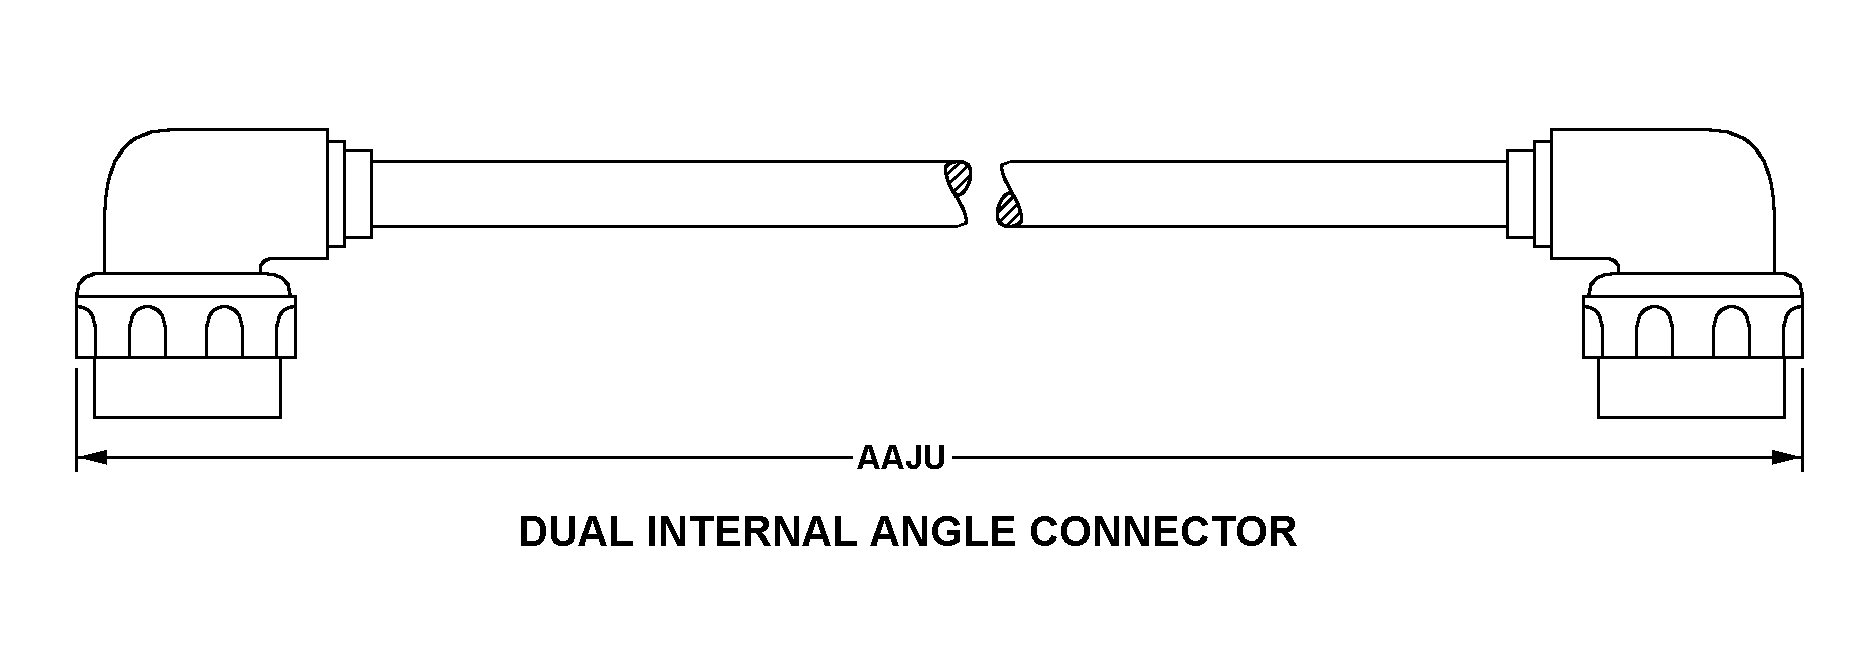 DUAL INTERNAL ANGLE CONNECTOR style nsn 5995-01-408-1699